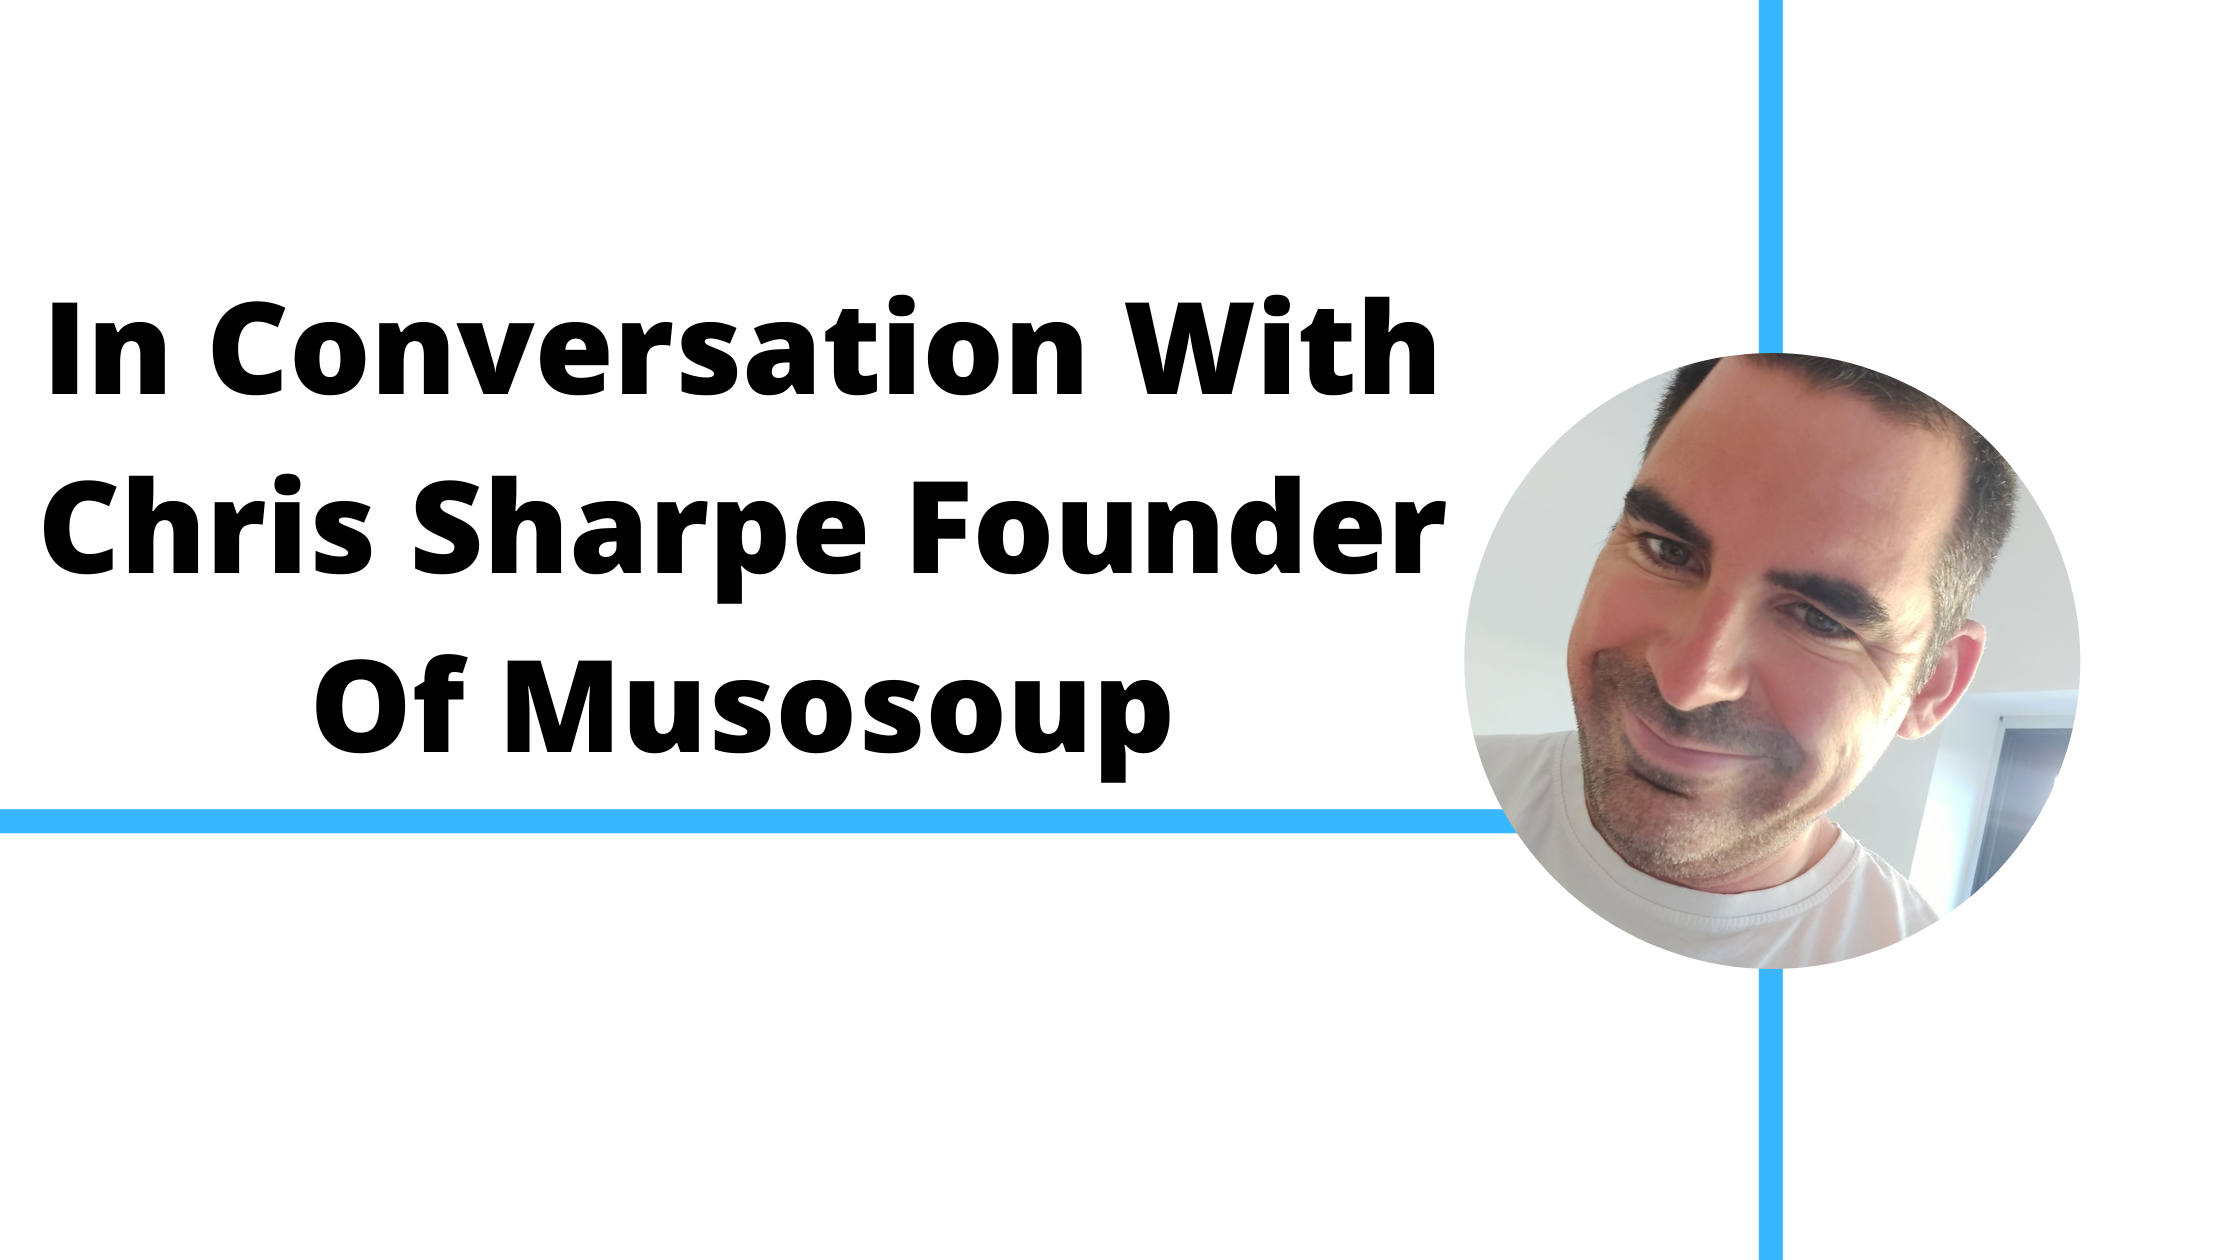 In Conversation With Chris Sharpe Founder Of Musosoup